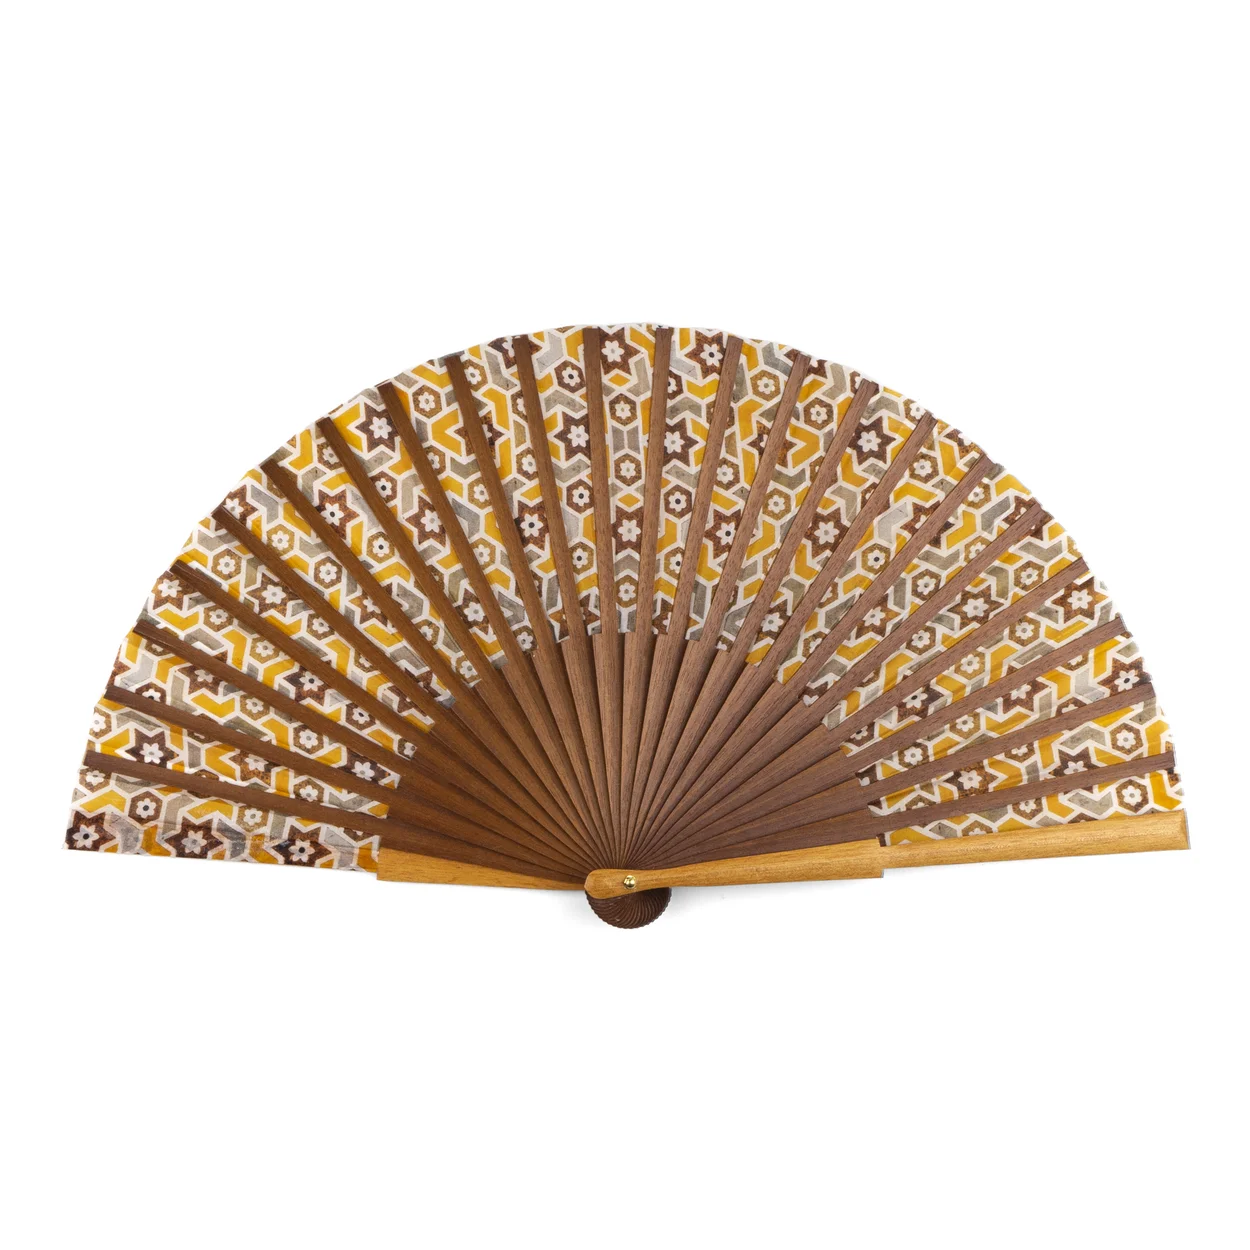 Brown silk hand fan and wood with islamic art inspired print